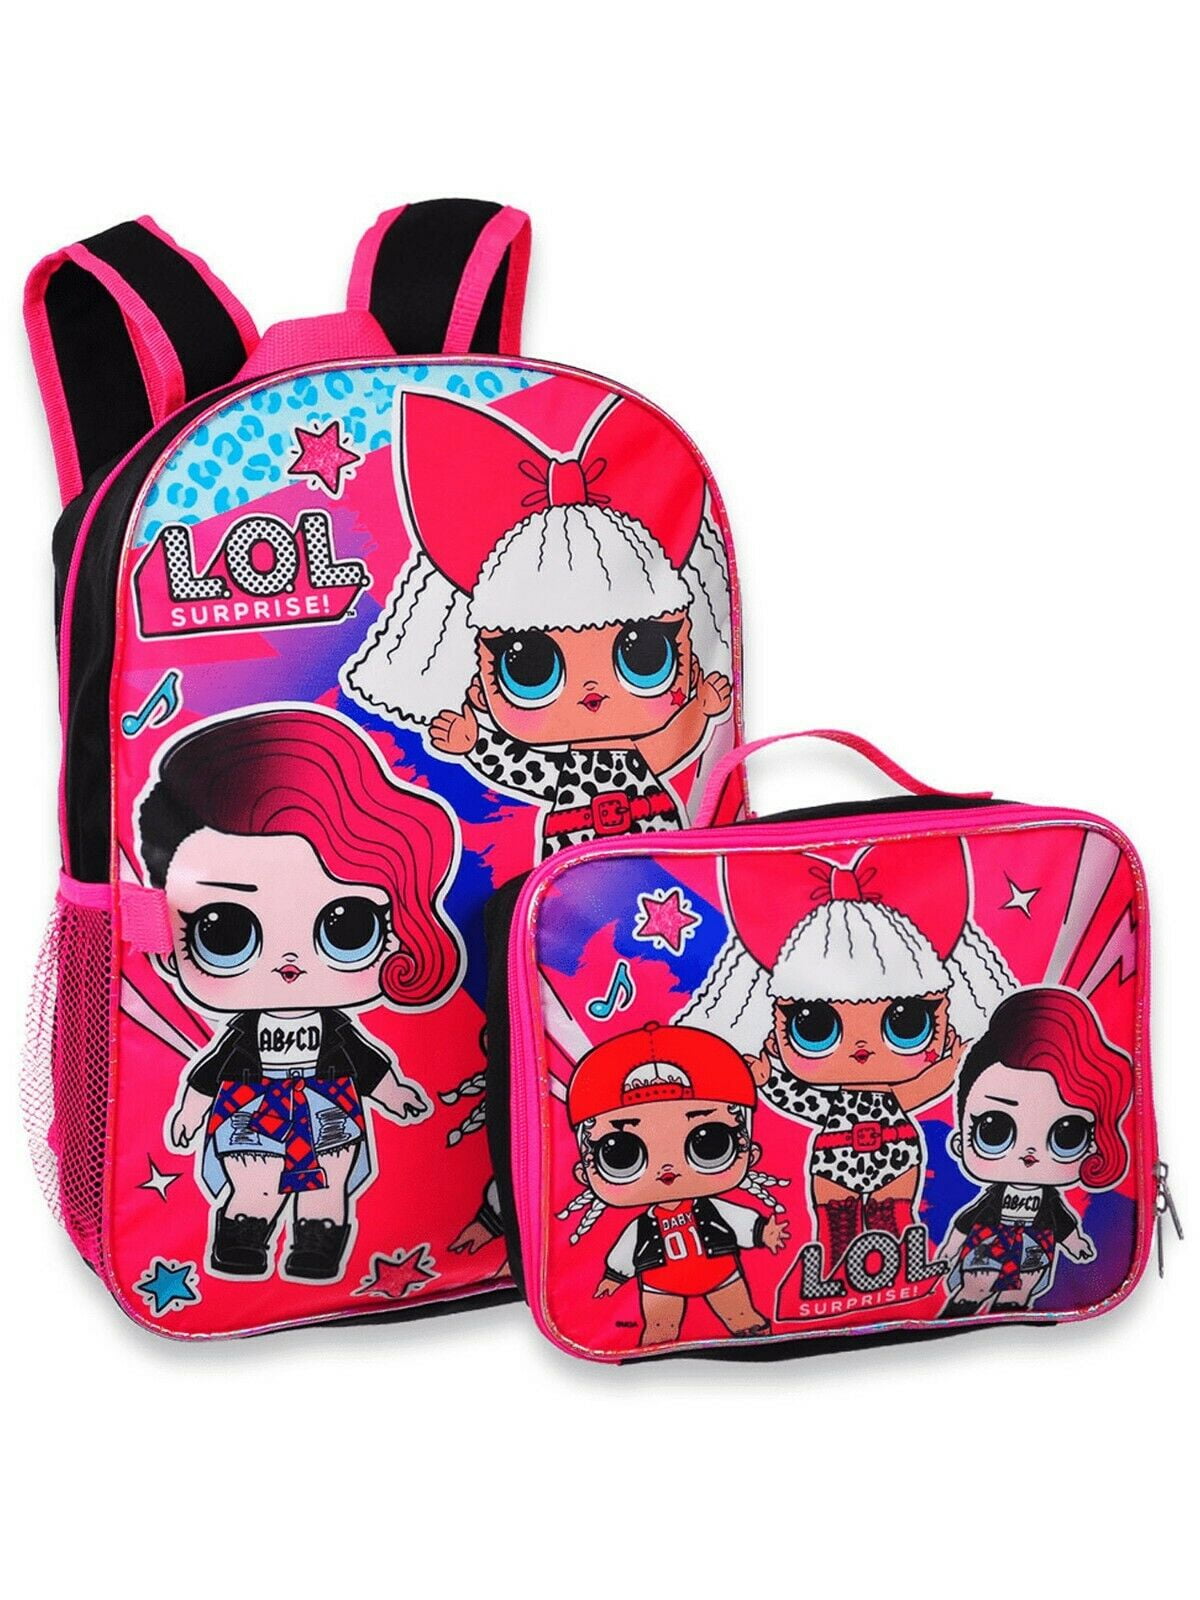 L.O.L. Surprise! Girls Soft Insulated School Lunch Box (One size, Black/Pink)